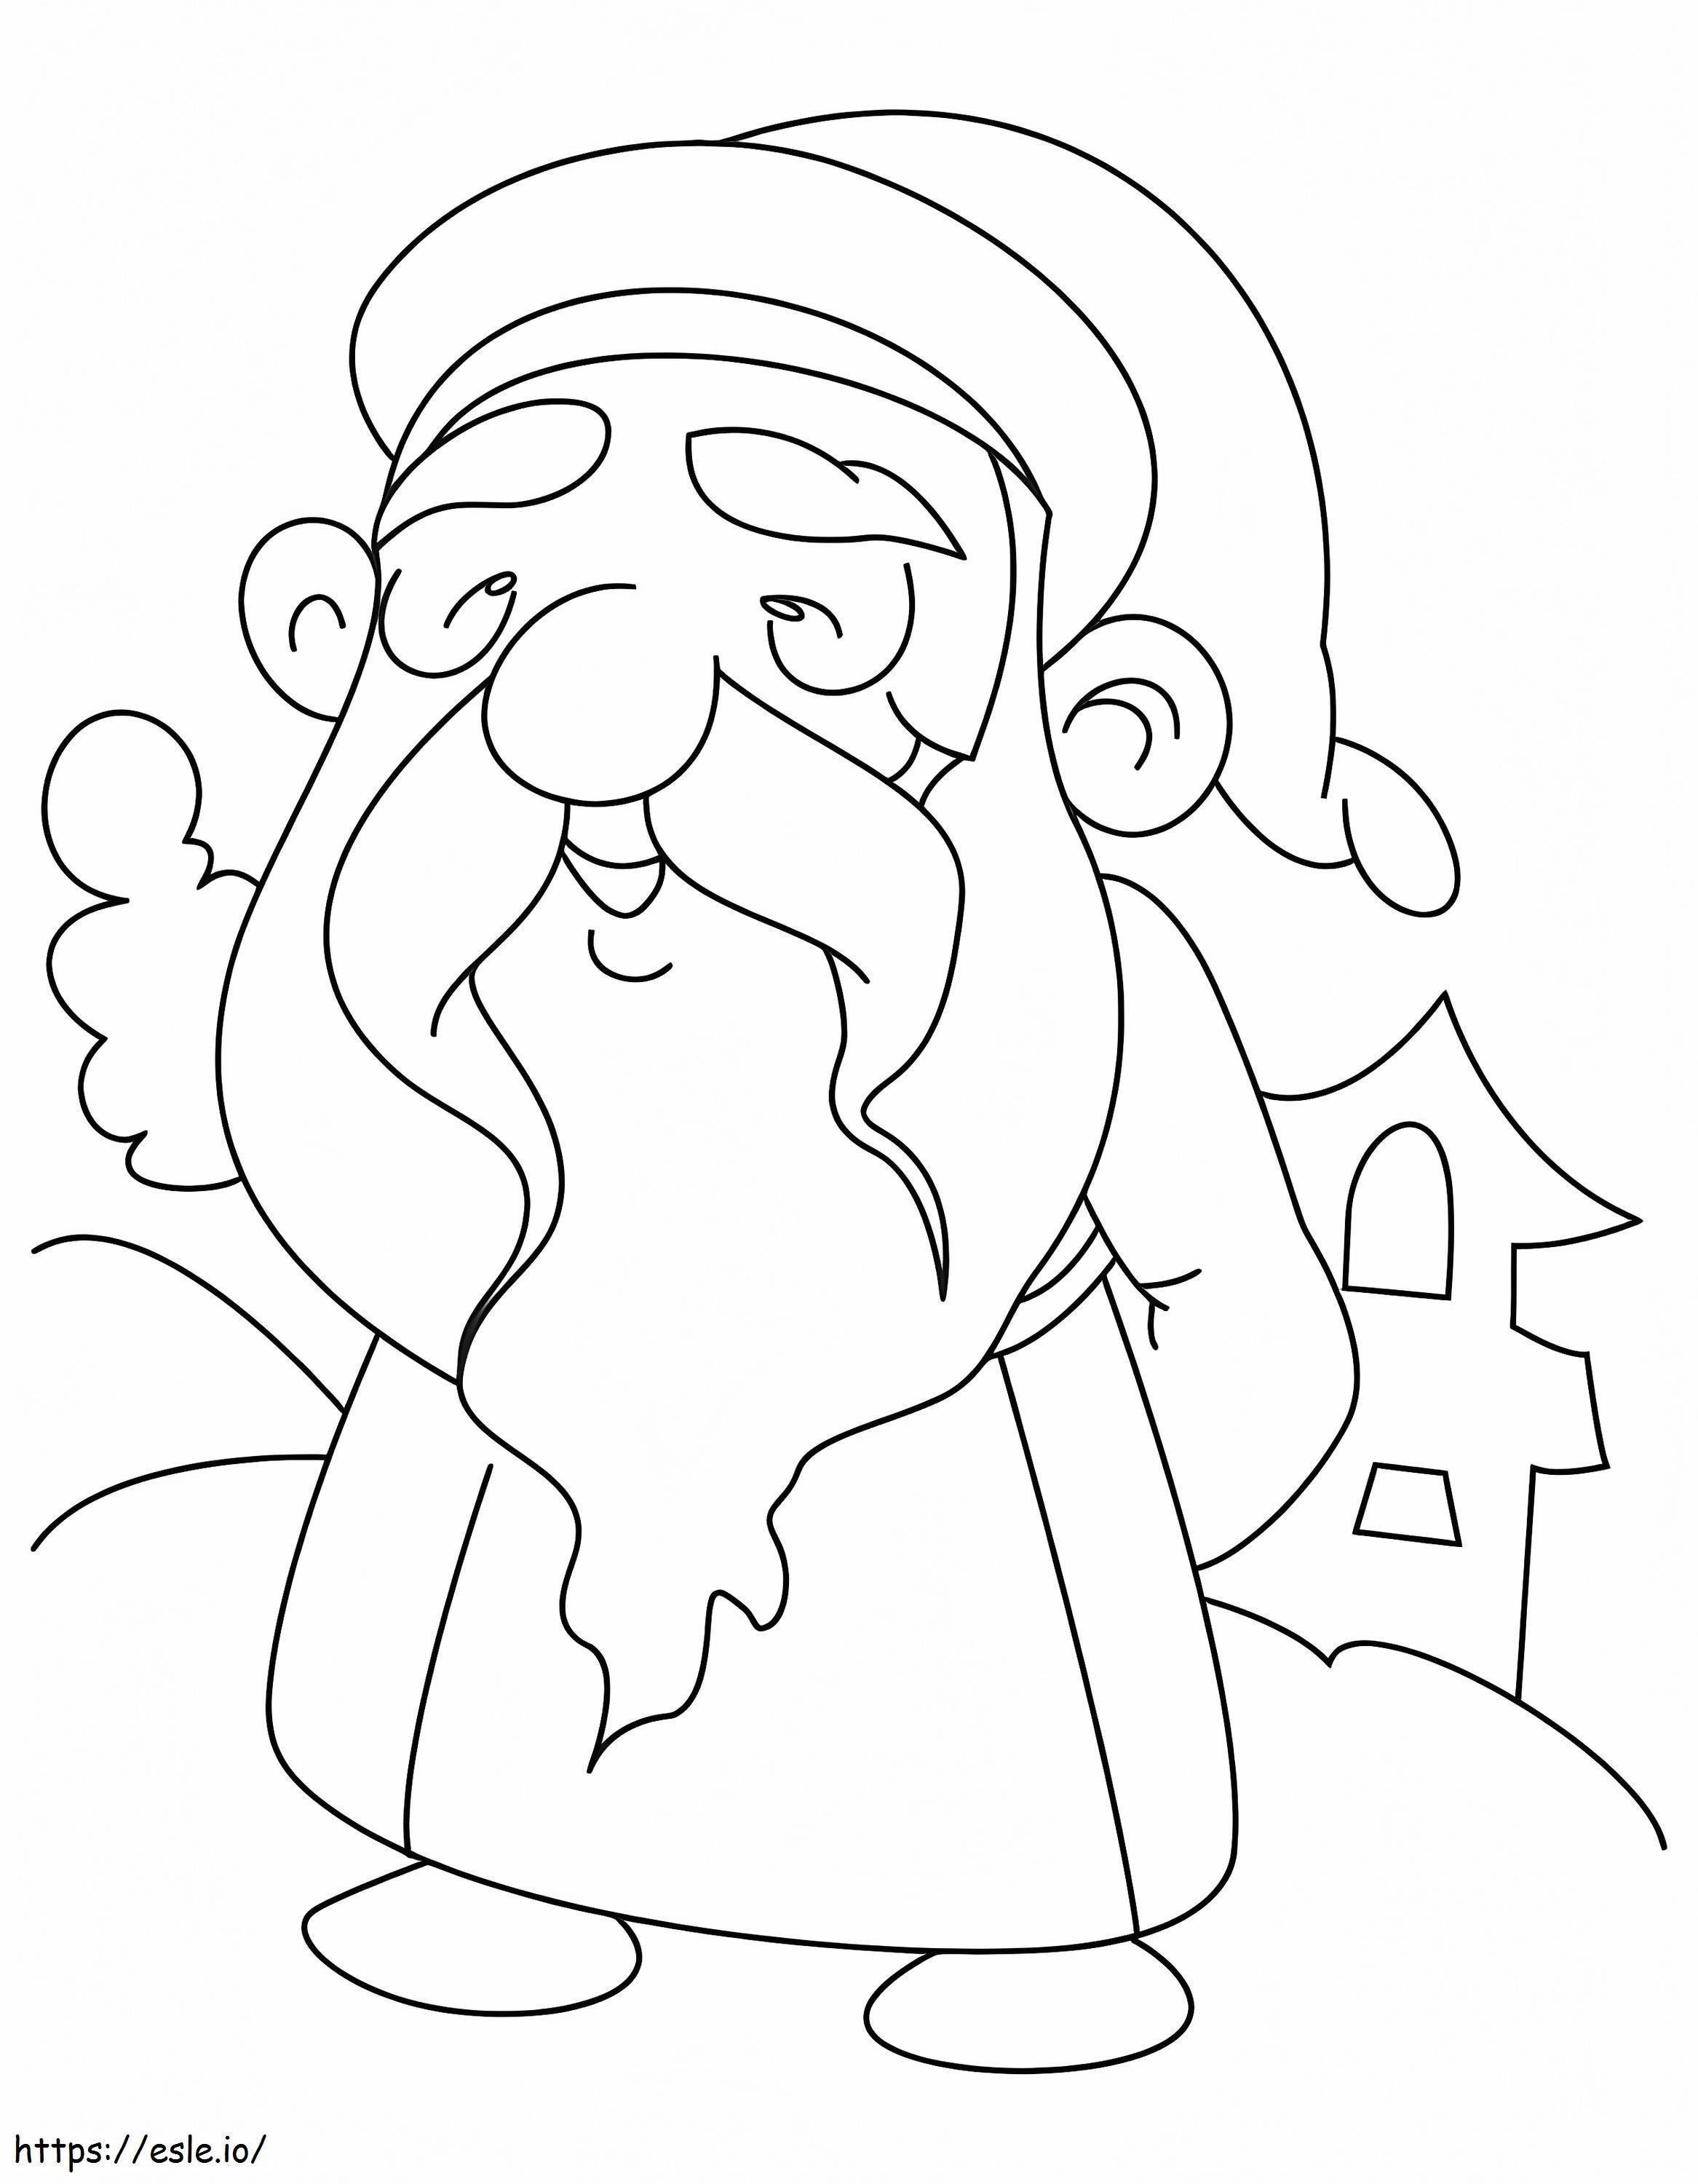 Old Dwarf 1 coloring page